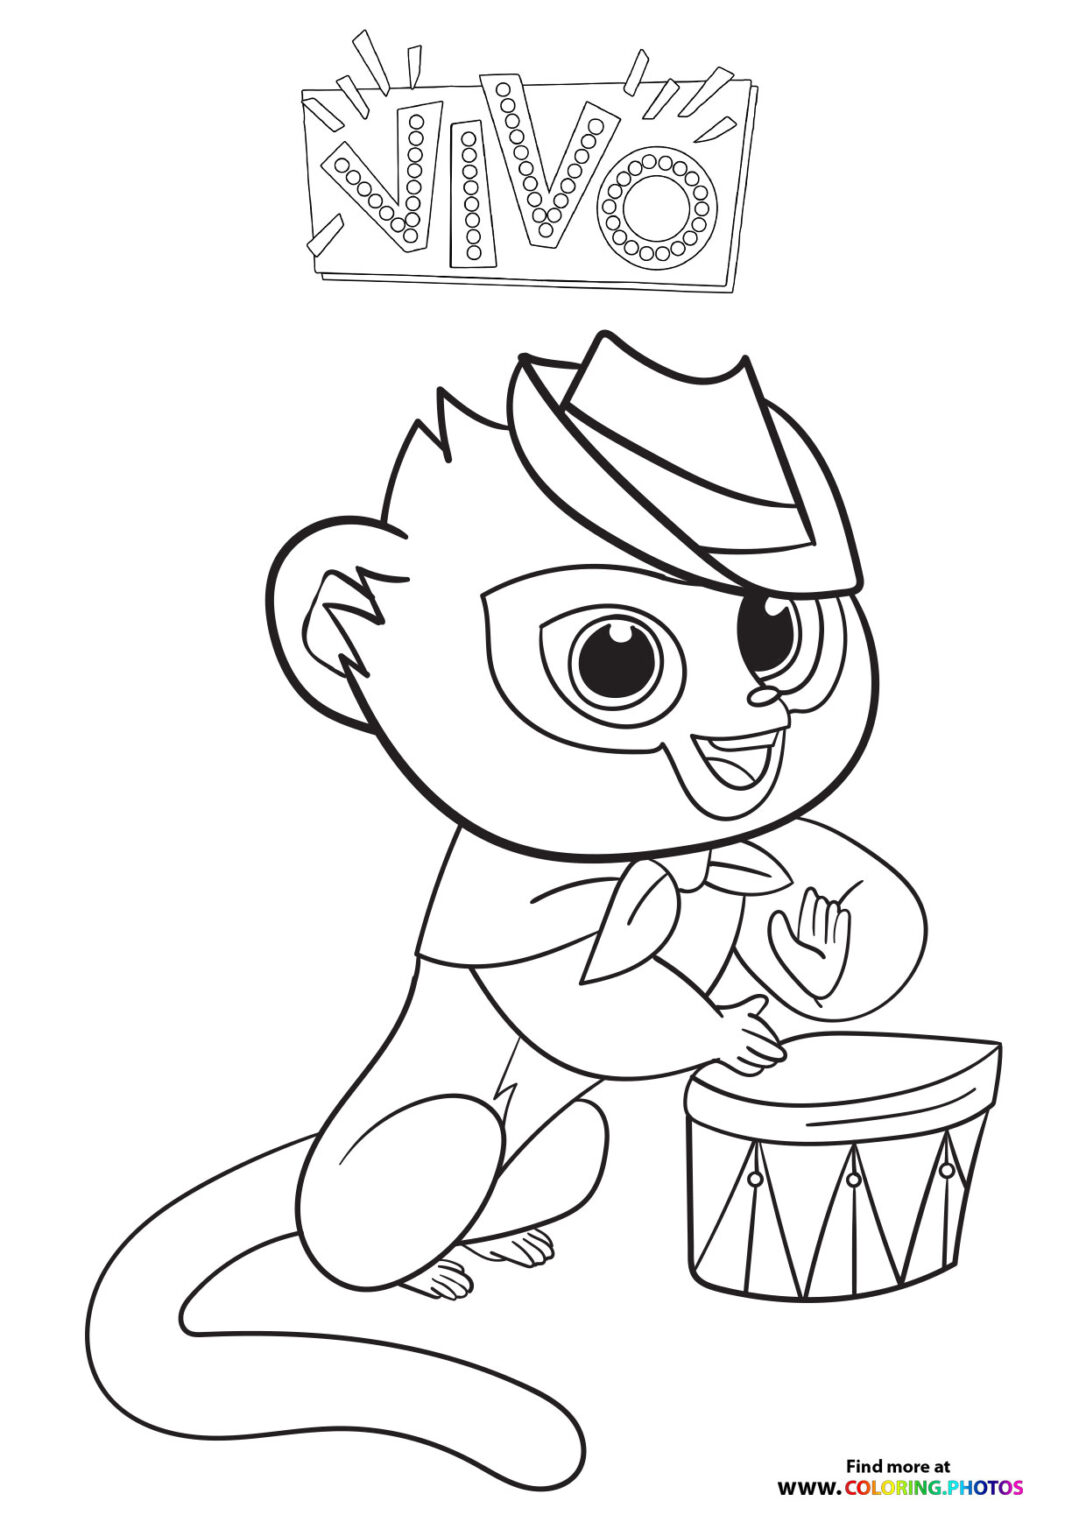 Vivo dancing - Coloring Pages for kids